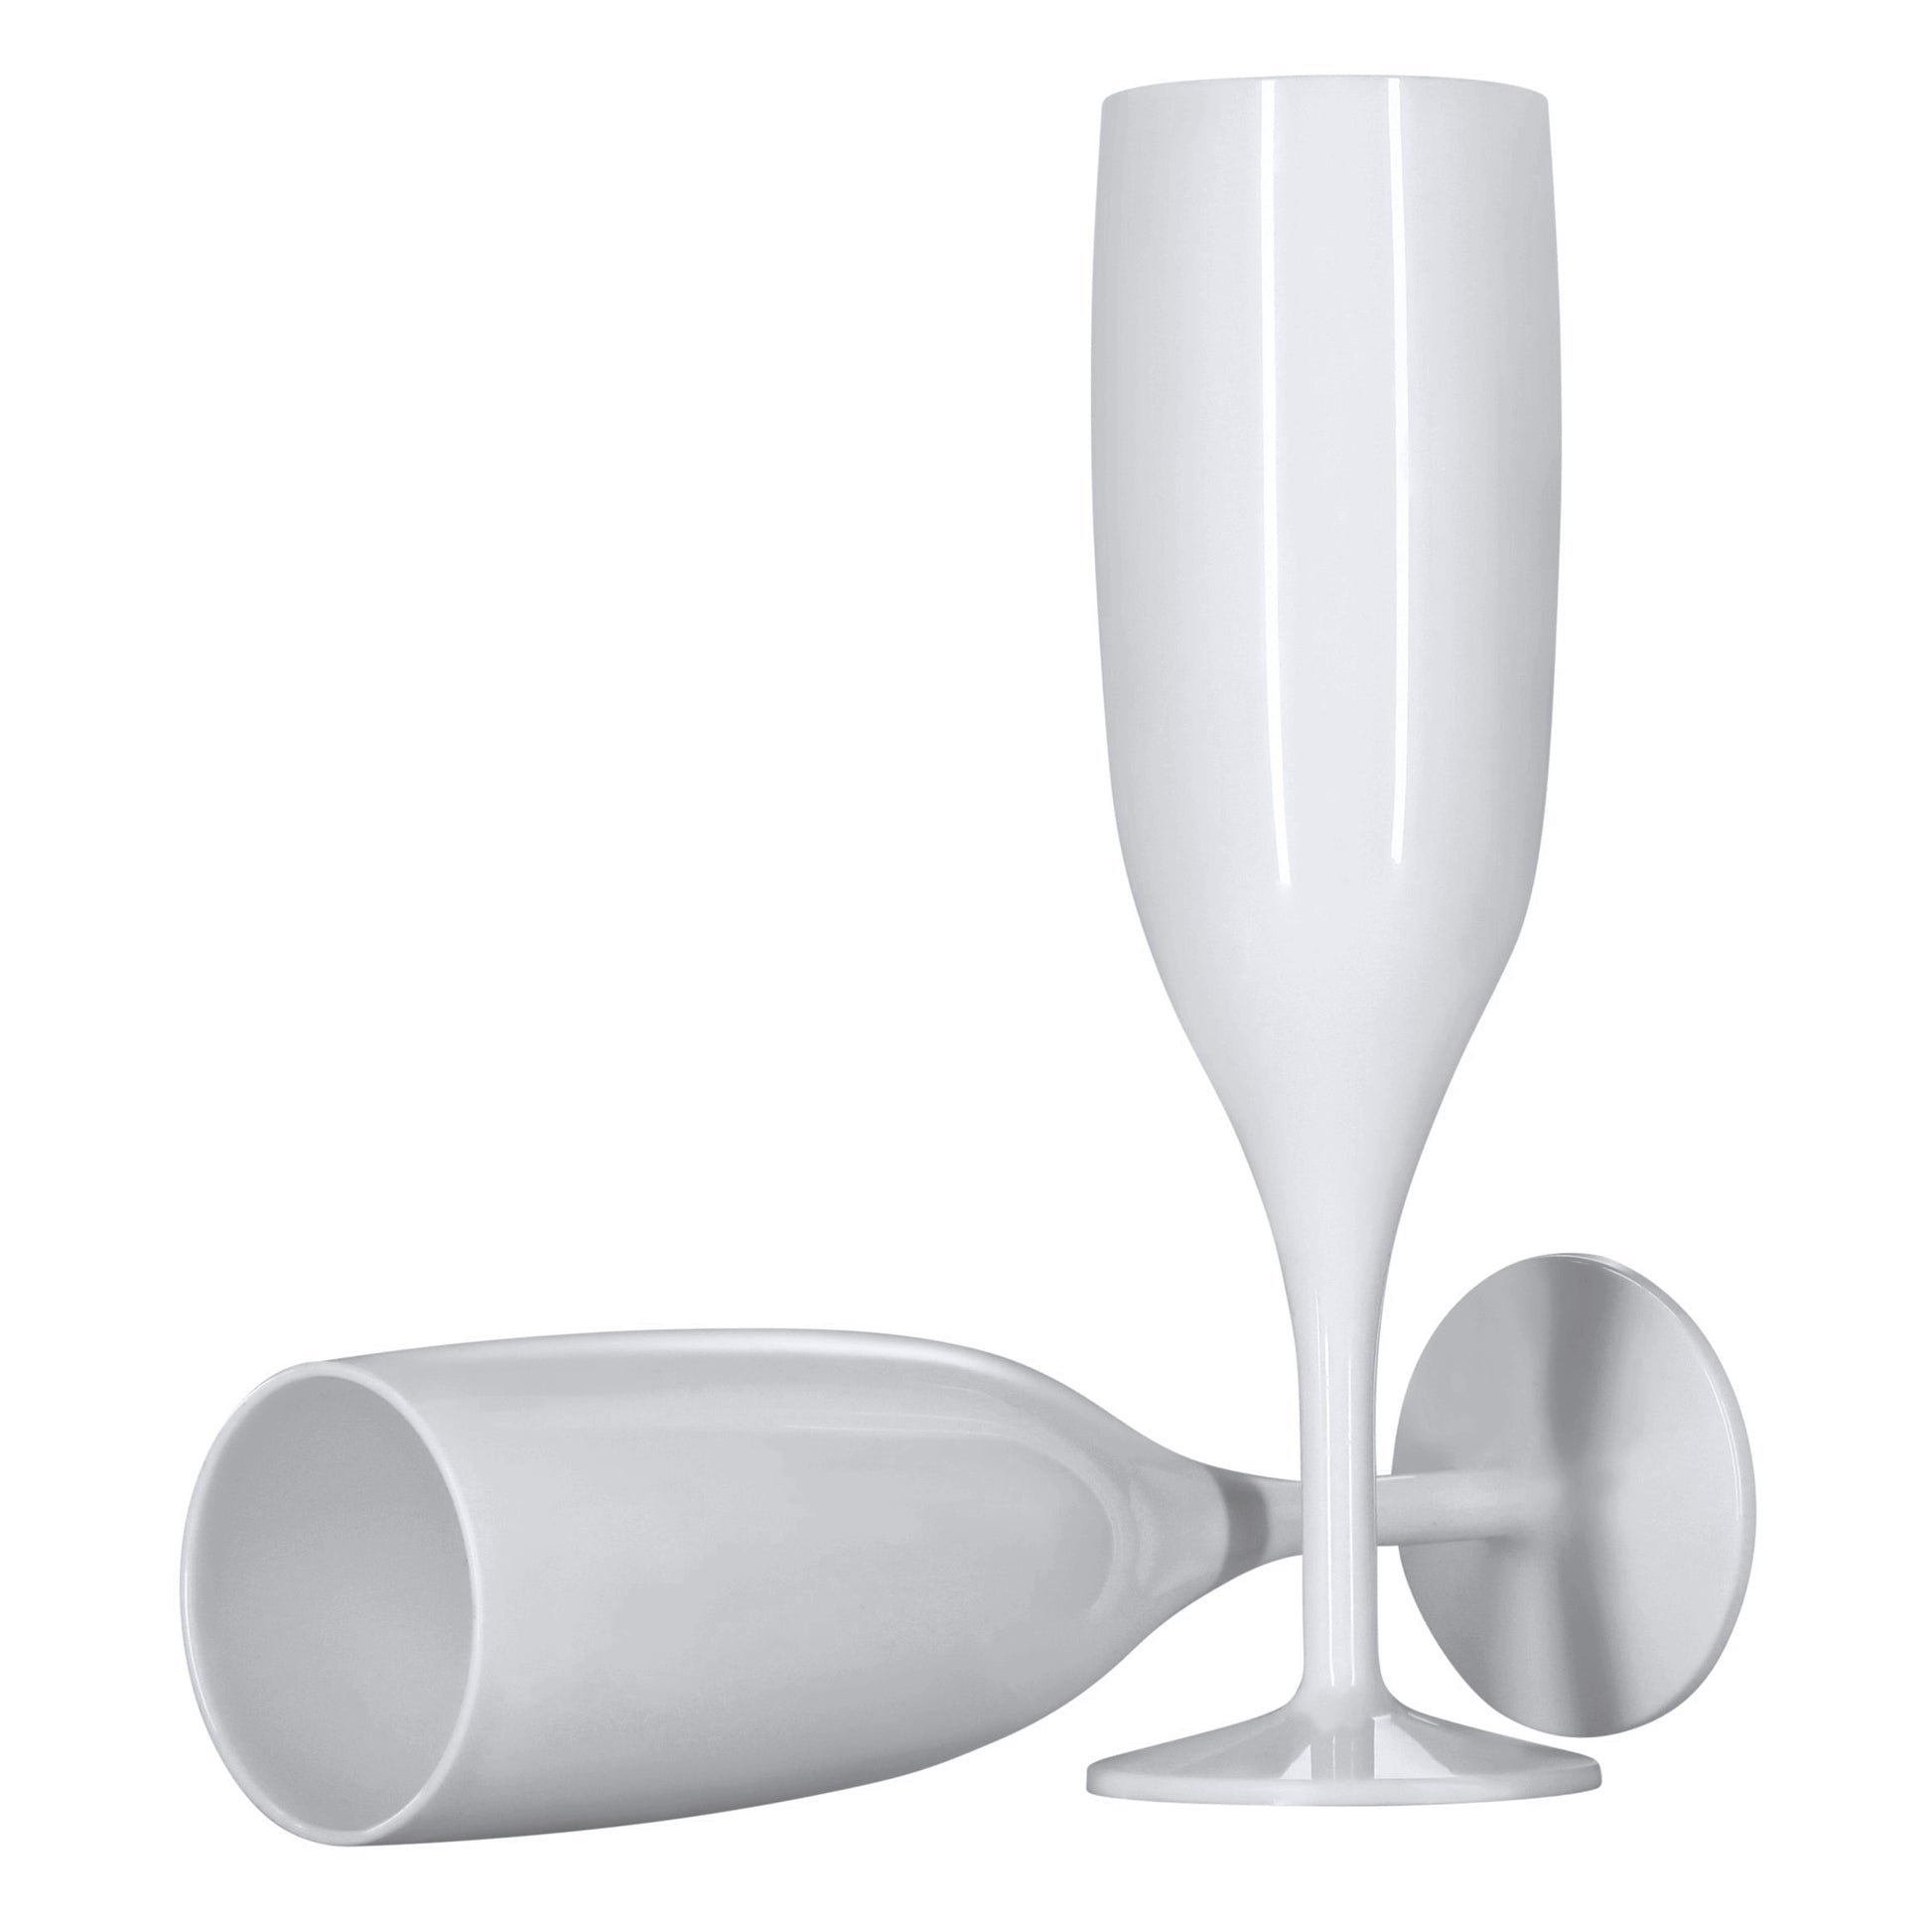 12 x White Prosecco Flutes – Made from Strong Reusable Plastic in glossy Bright White Colour 1-Piece Champagne Glass (Pack of 12 Glasses) for use Indoors and Outdoors, Wedding, Parties, Bridal Shower-5056020186236-EY-PP-077-Product Pro-Baby Shower, Bridal Shower, Hen Do, Reusable Flutes, White Champagne Flutes, White Champagne Glasses, White Flutes, White Prosecco Flutes, White Prosecco Glasses